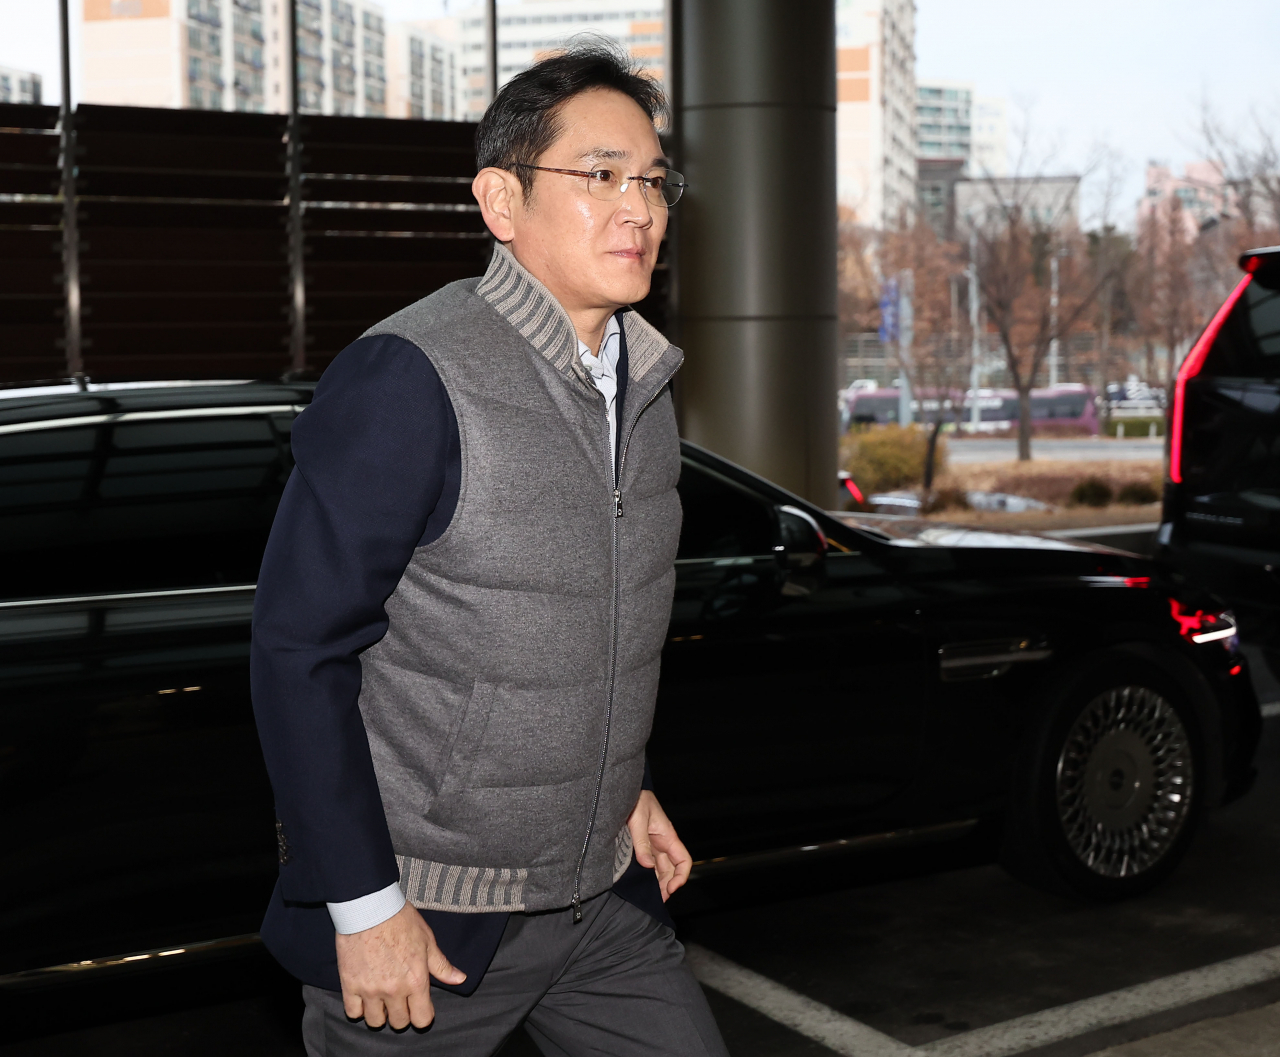 Samsung Electronics Chairman Lee Jae-yong appears at Seoul Gimpo Business Aviation Center to depart for the United Arab Emirates on Wednesday.